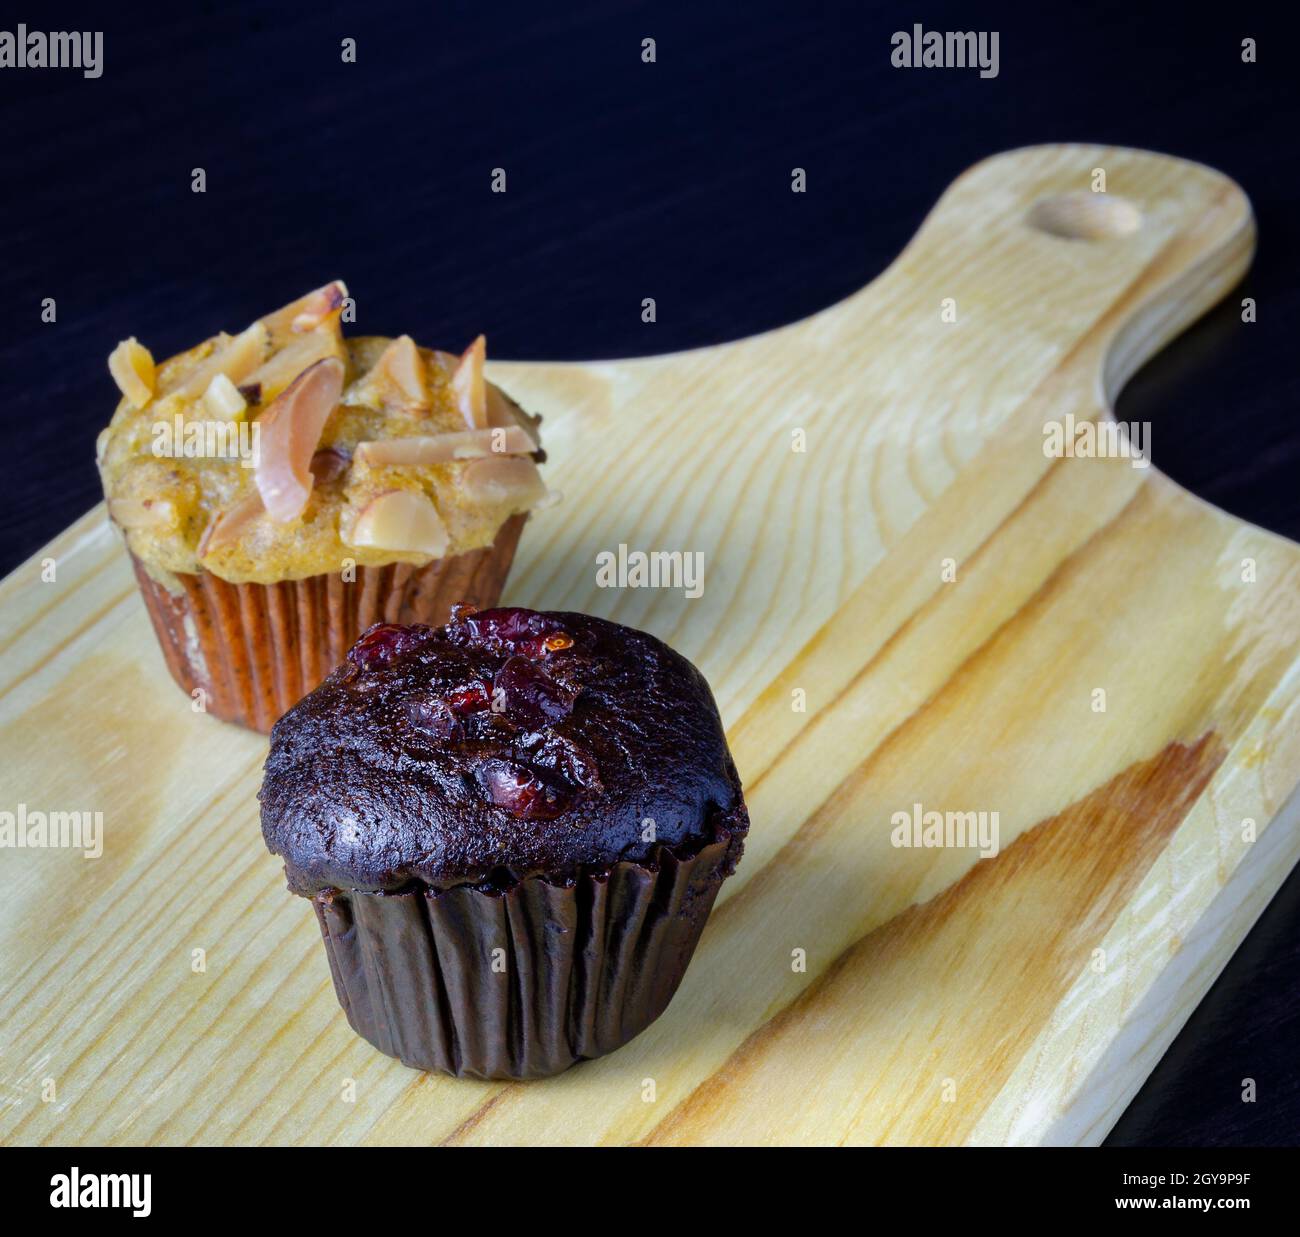 Chocolate cherry muffin and banana cupcake with almond toping on wooden board Stock Photo